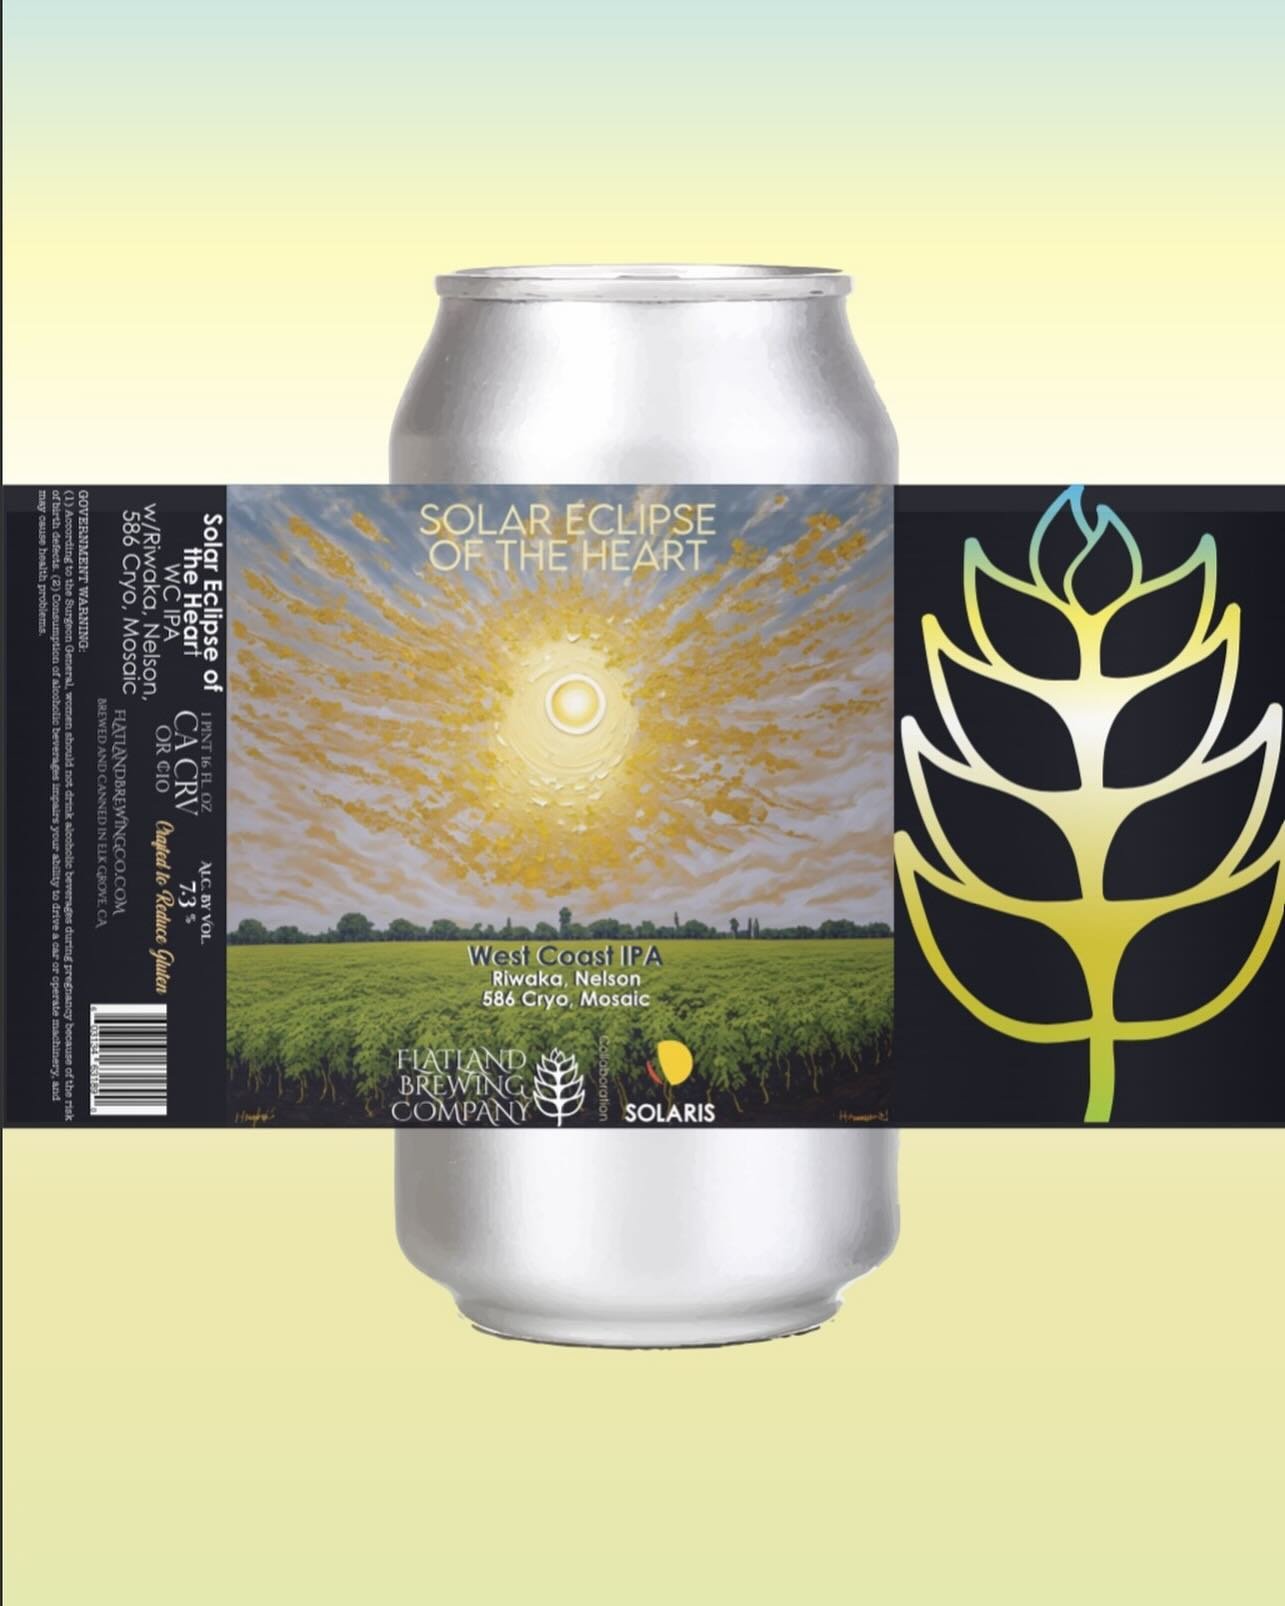 Introducing &ldquo;Solar Eclipse Of The Heart&rdquo;. West Coast IPA with Riwaka, Nelson, HBC 586 Cryo &amp; Mosaic. Created with our pals @solarisbeer, each sip will transport you to moments of the sun&rsquo;s pure radiance. 

The Riwaka &amp; Nelso